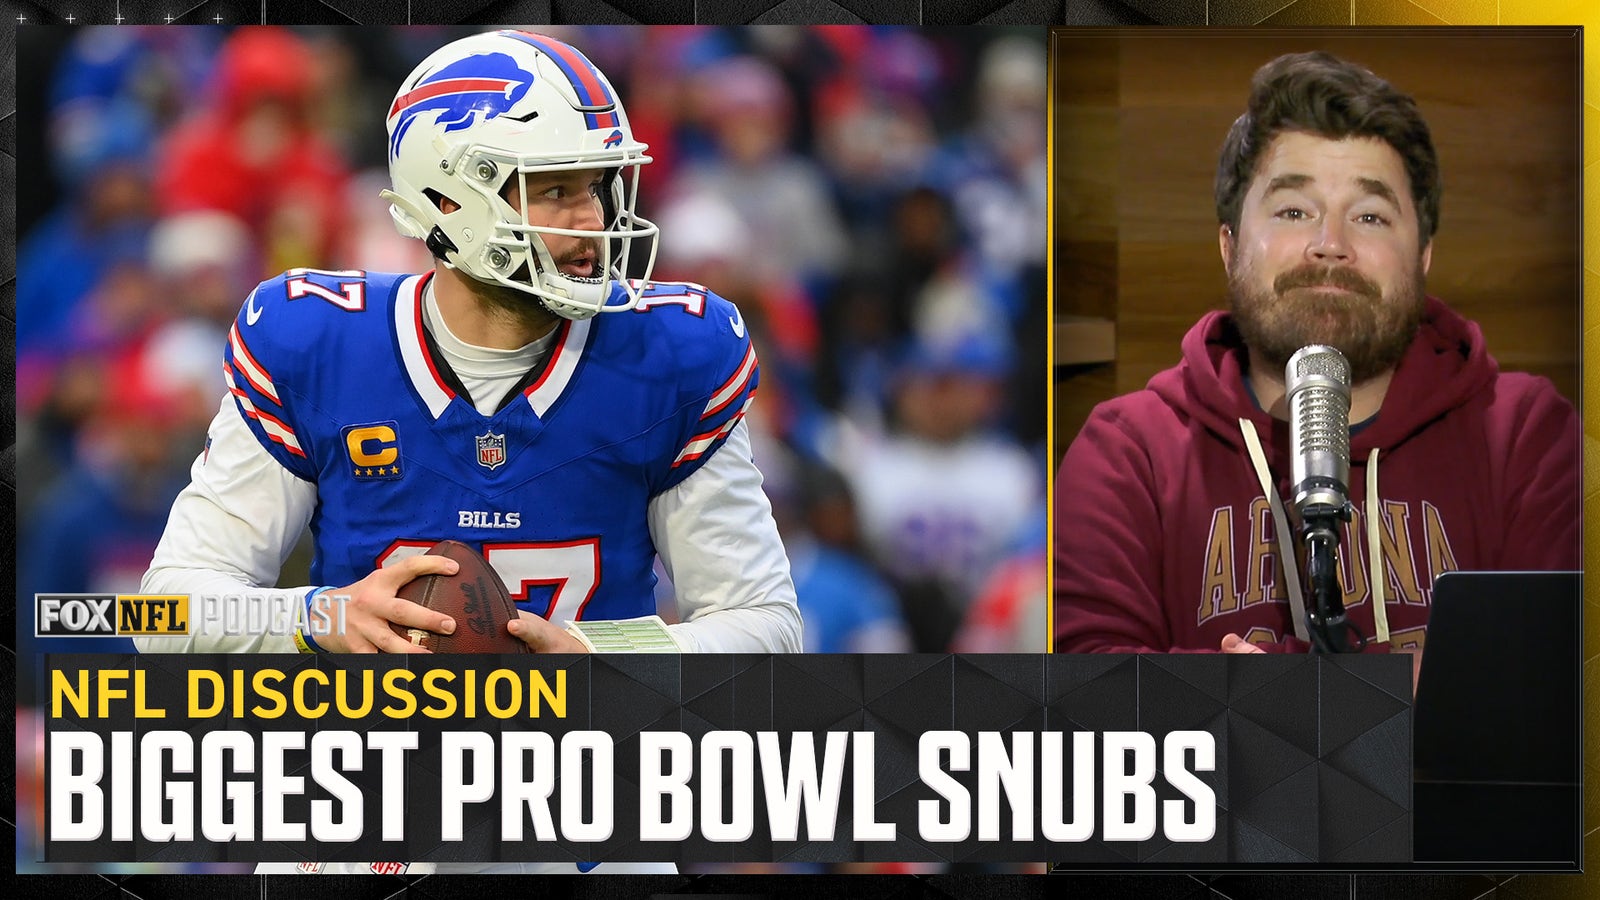 Dave Helman reacts to Pro Bowl rosters being announced and says who got snubbed